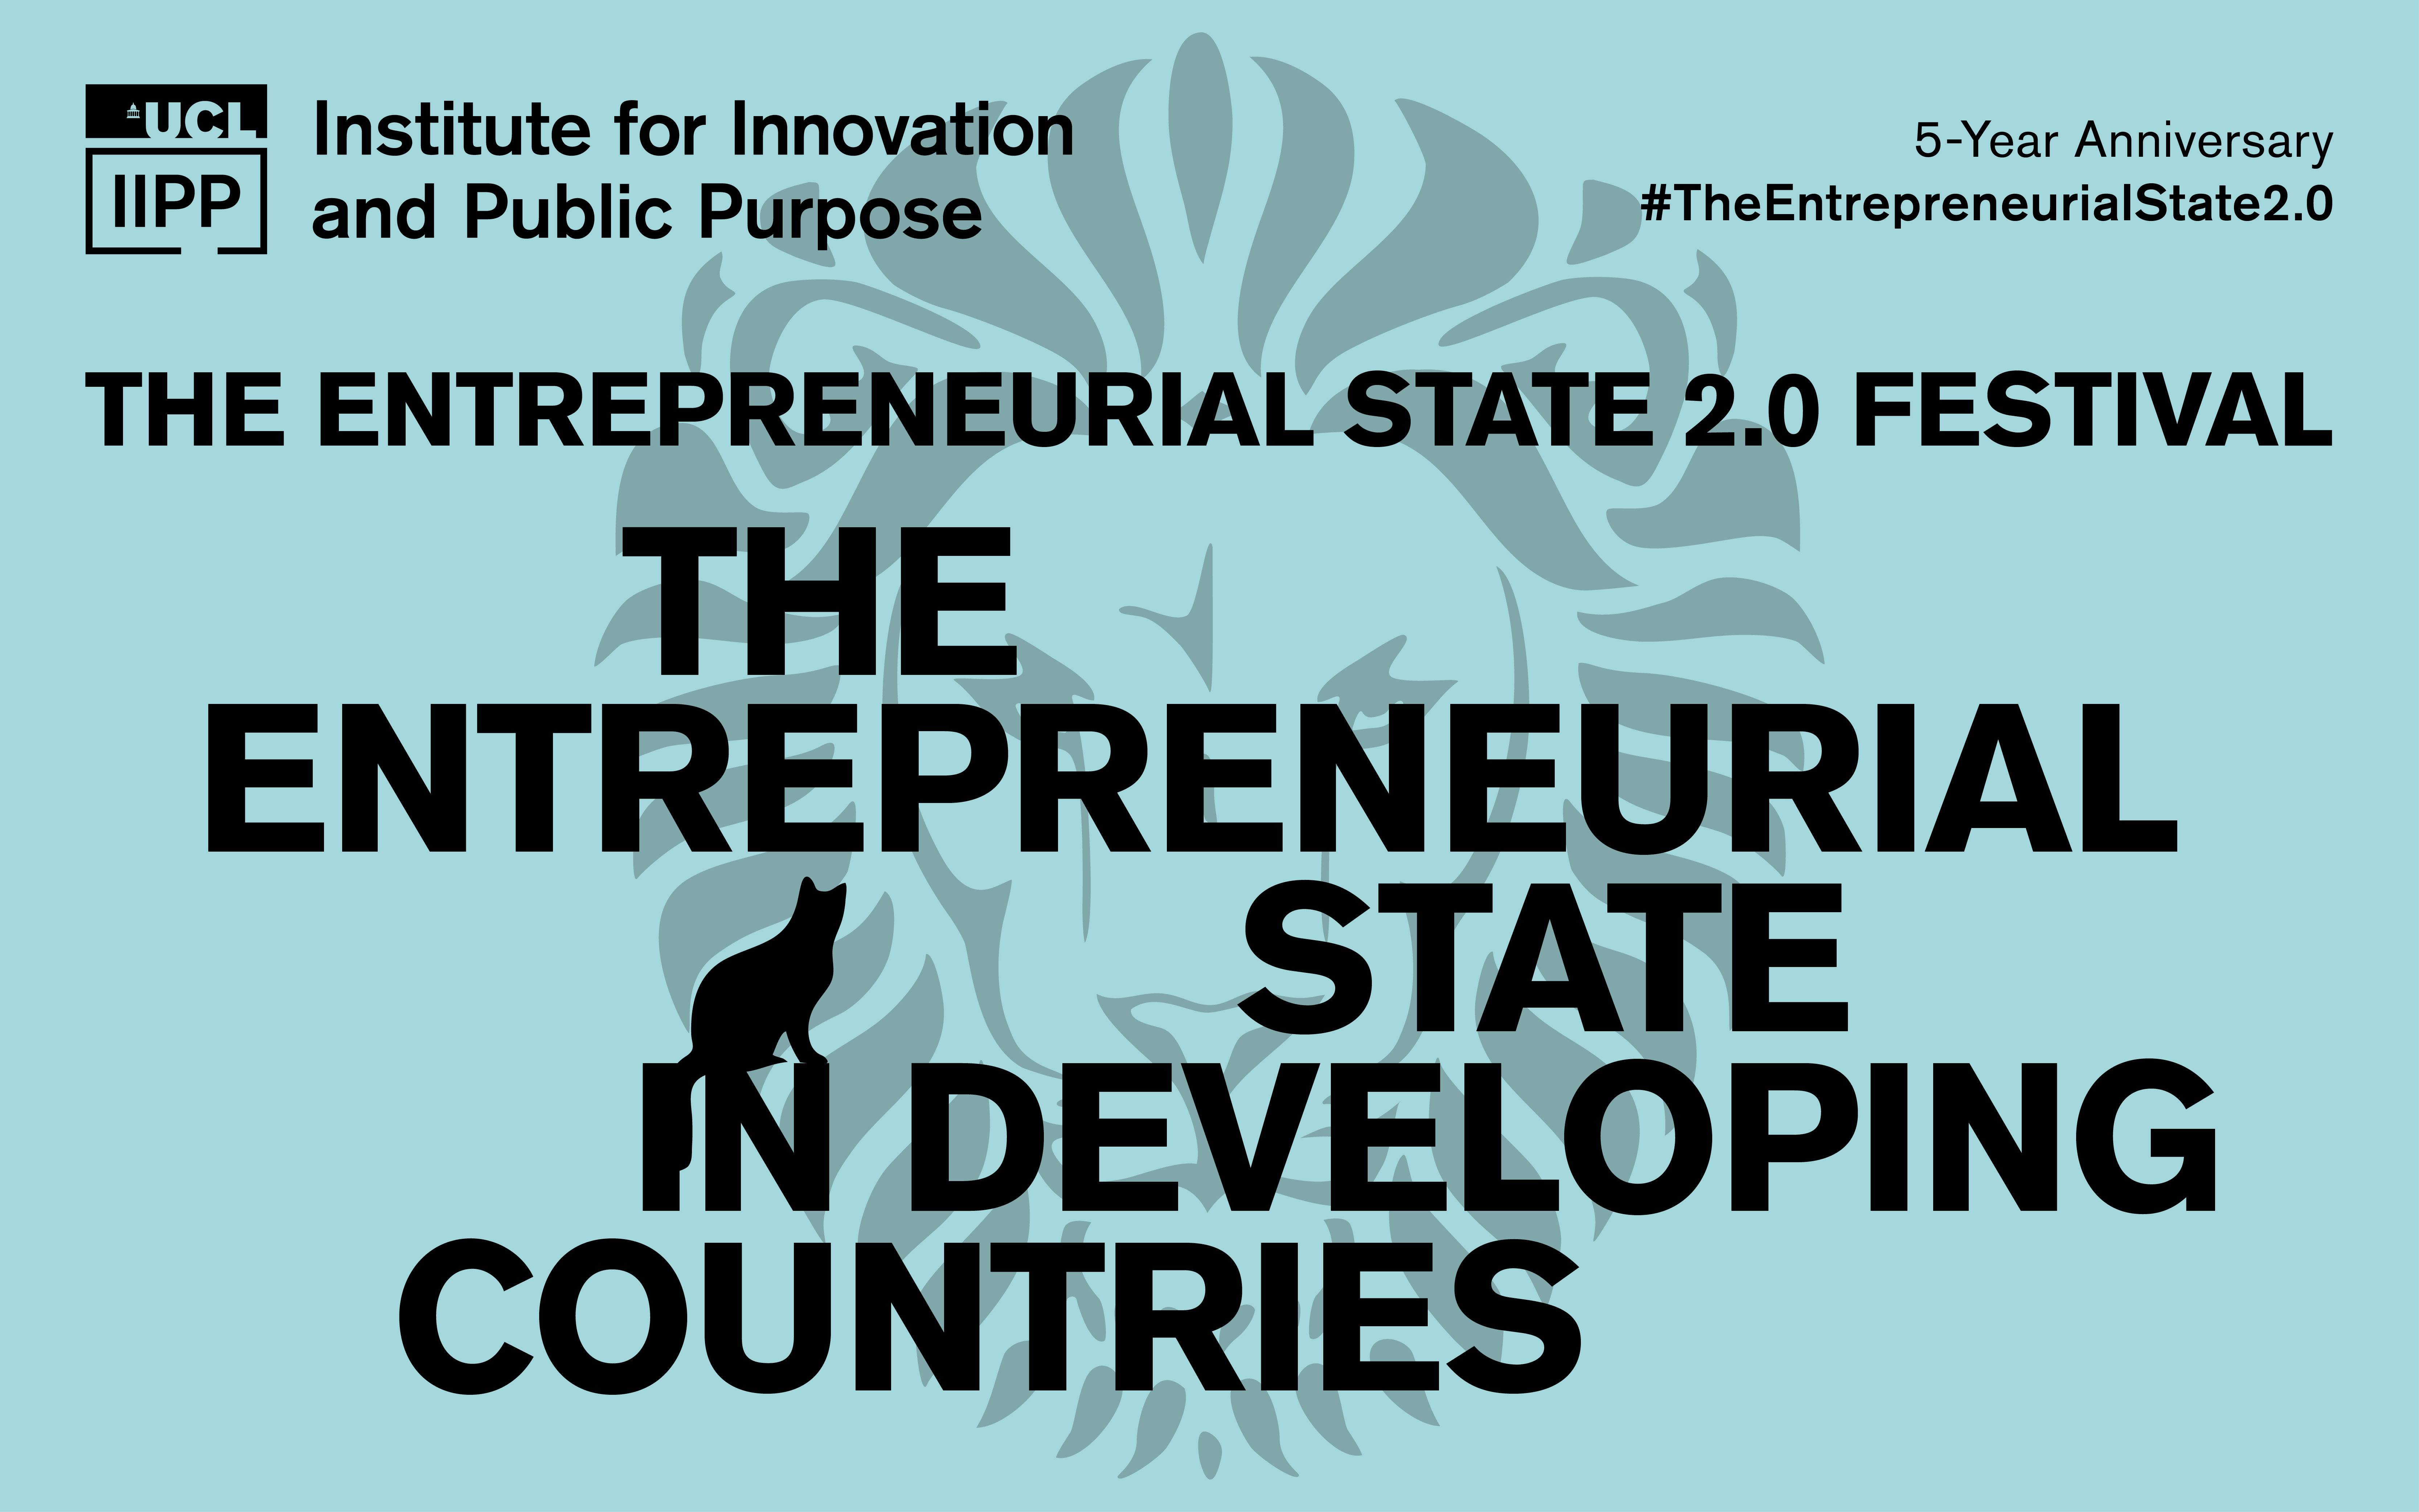 The Entrepreneurial State in developing countries 